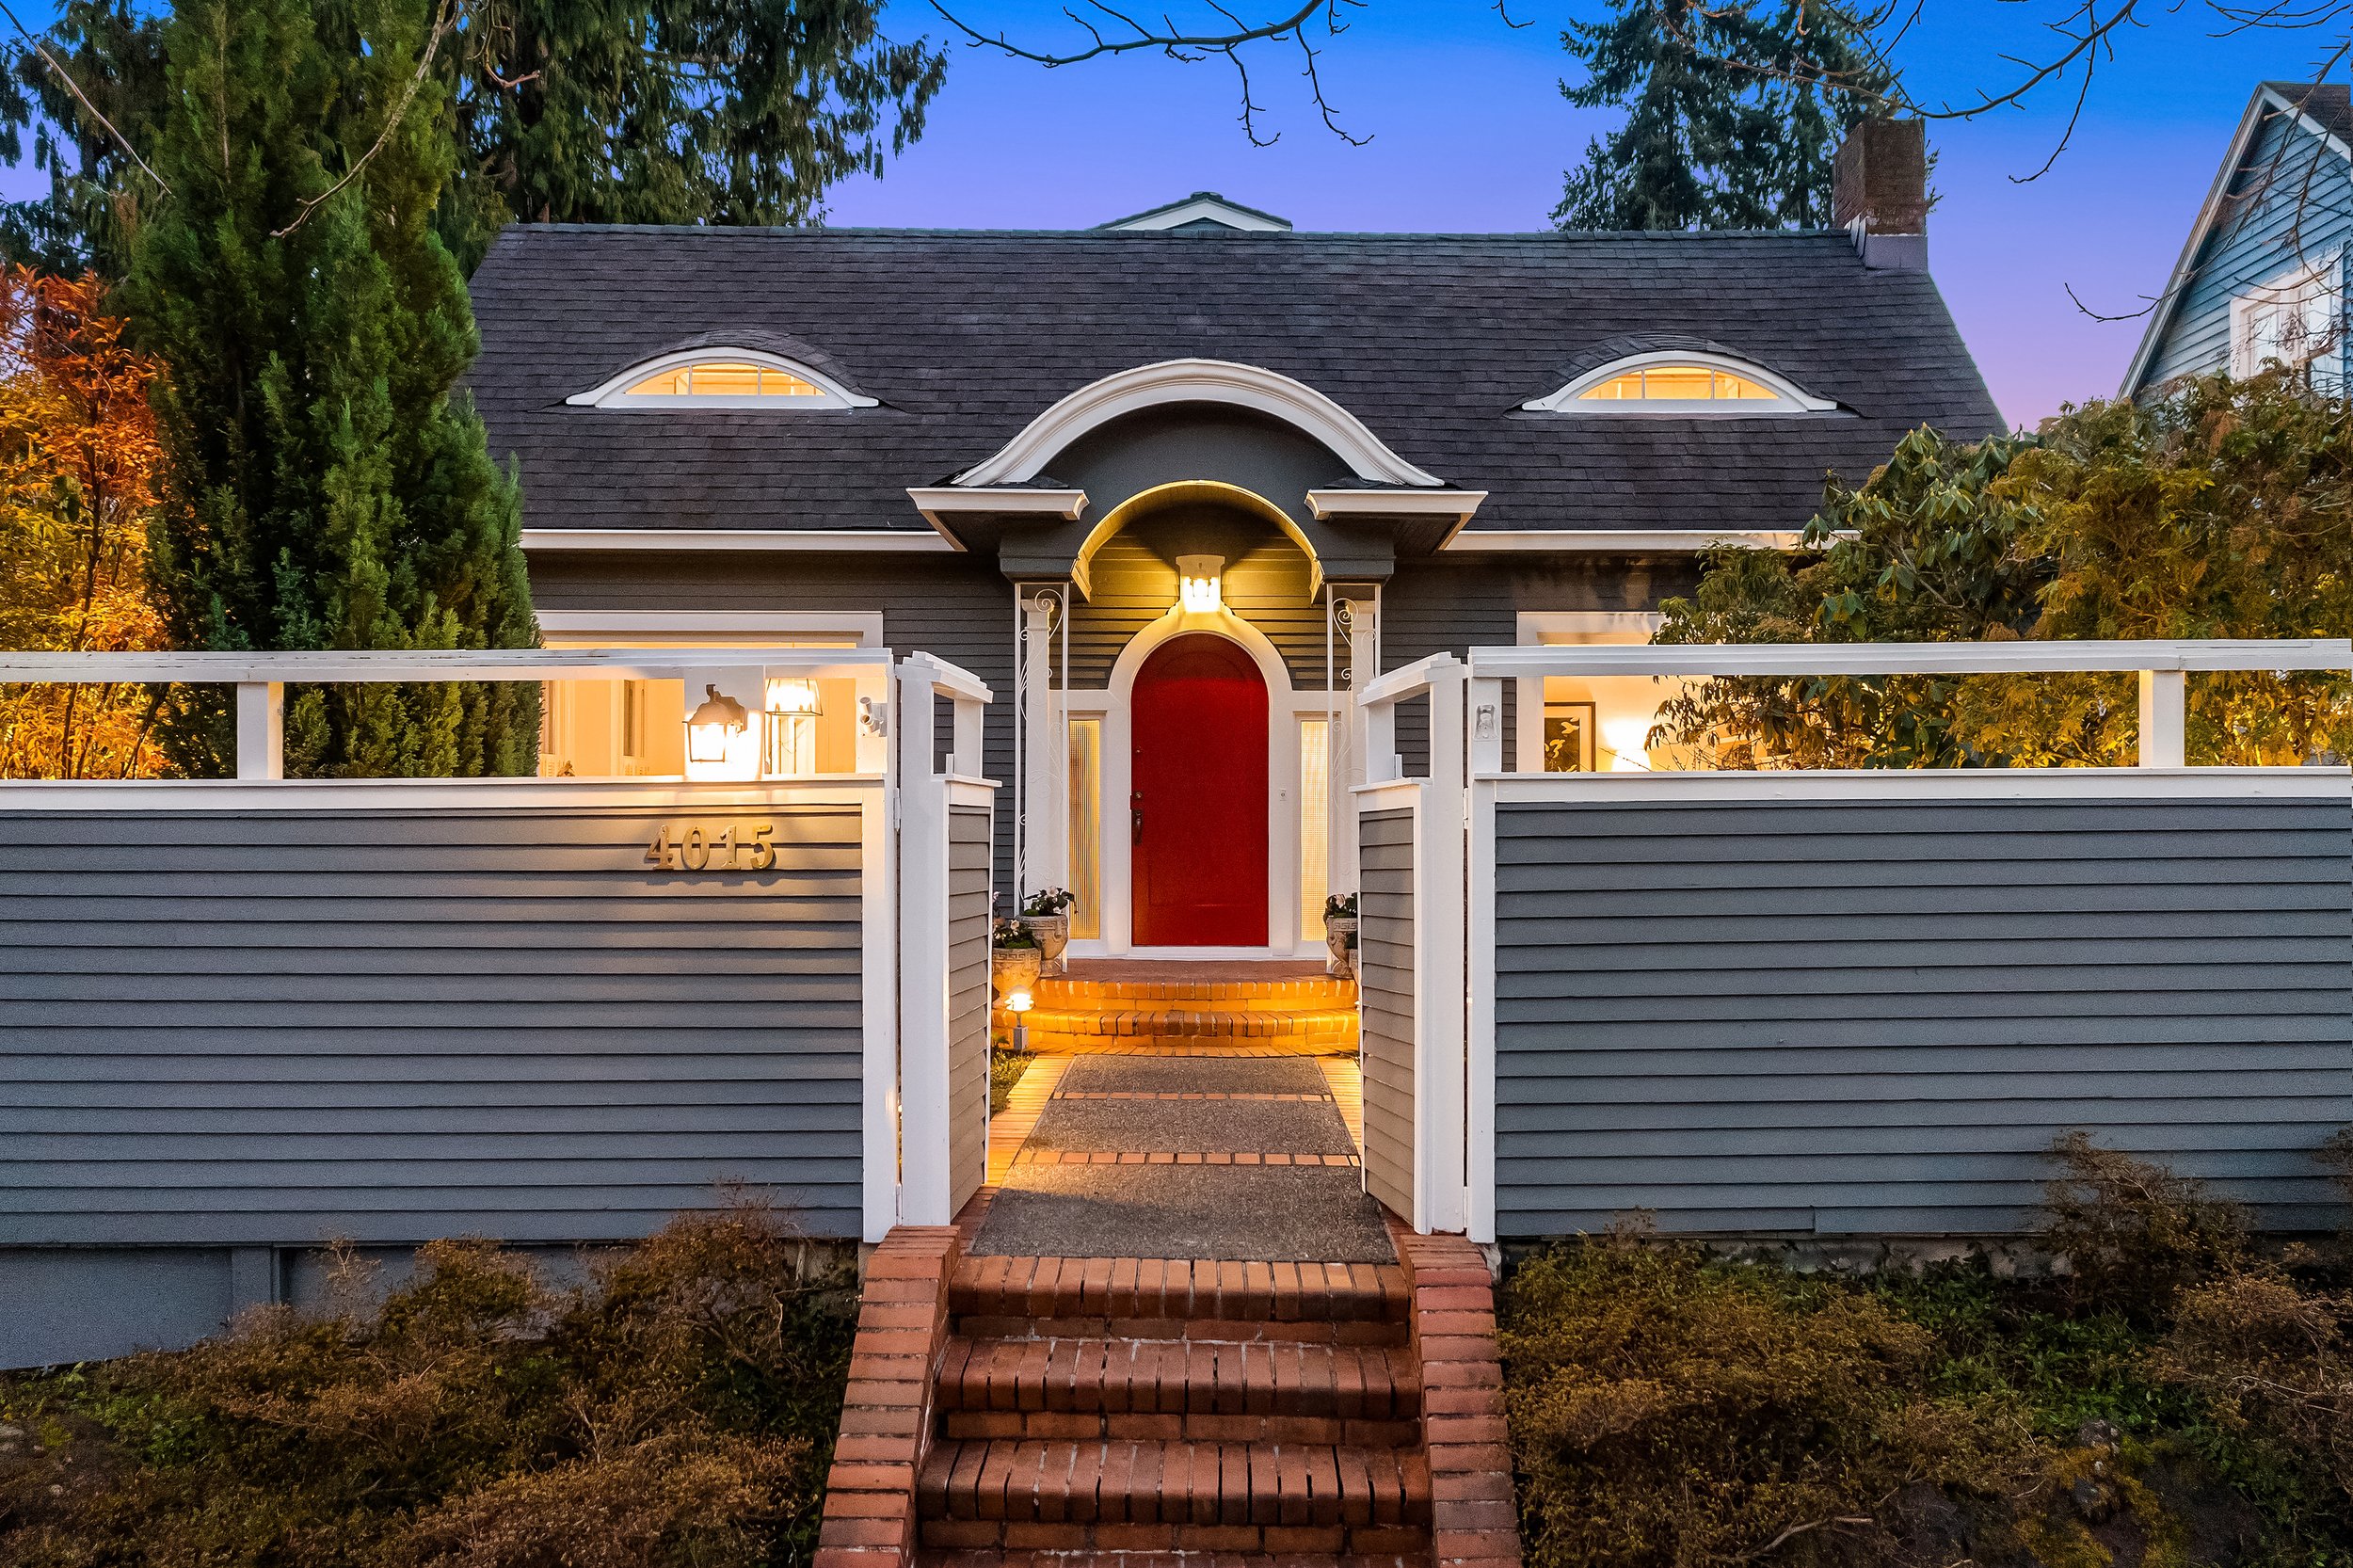  Rare offering to acquire this 1926 Washington Park classic. Situated among lovely gardens, this beauty is anchored within one of the neighborhoods most coveted locations. 